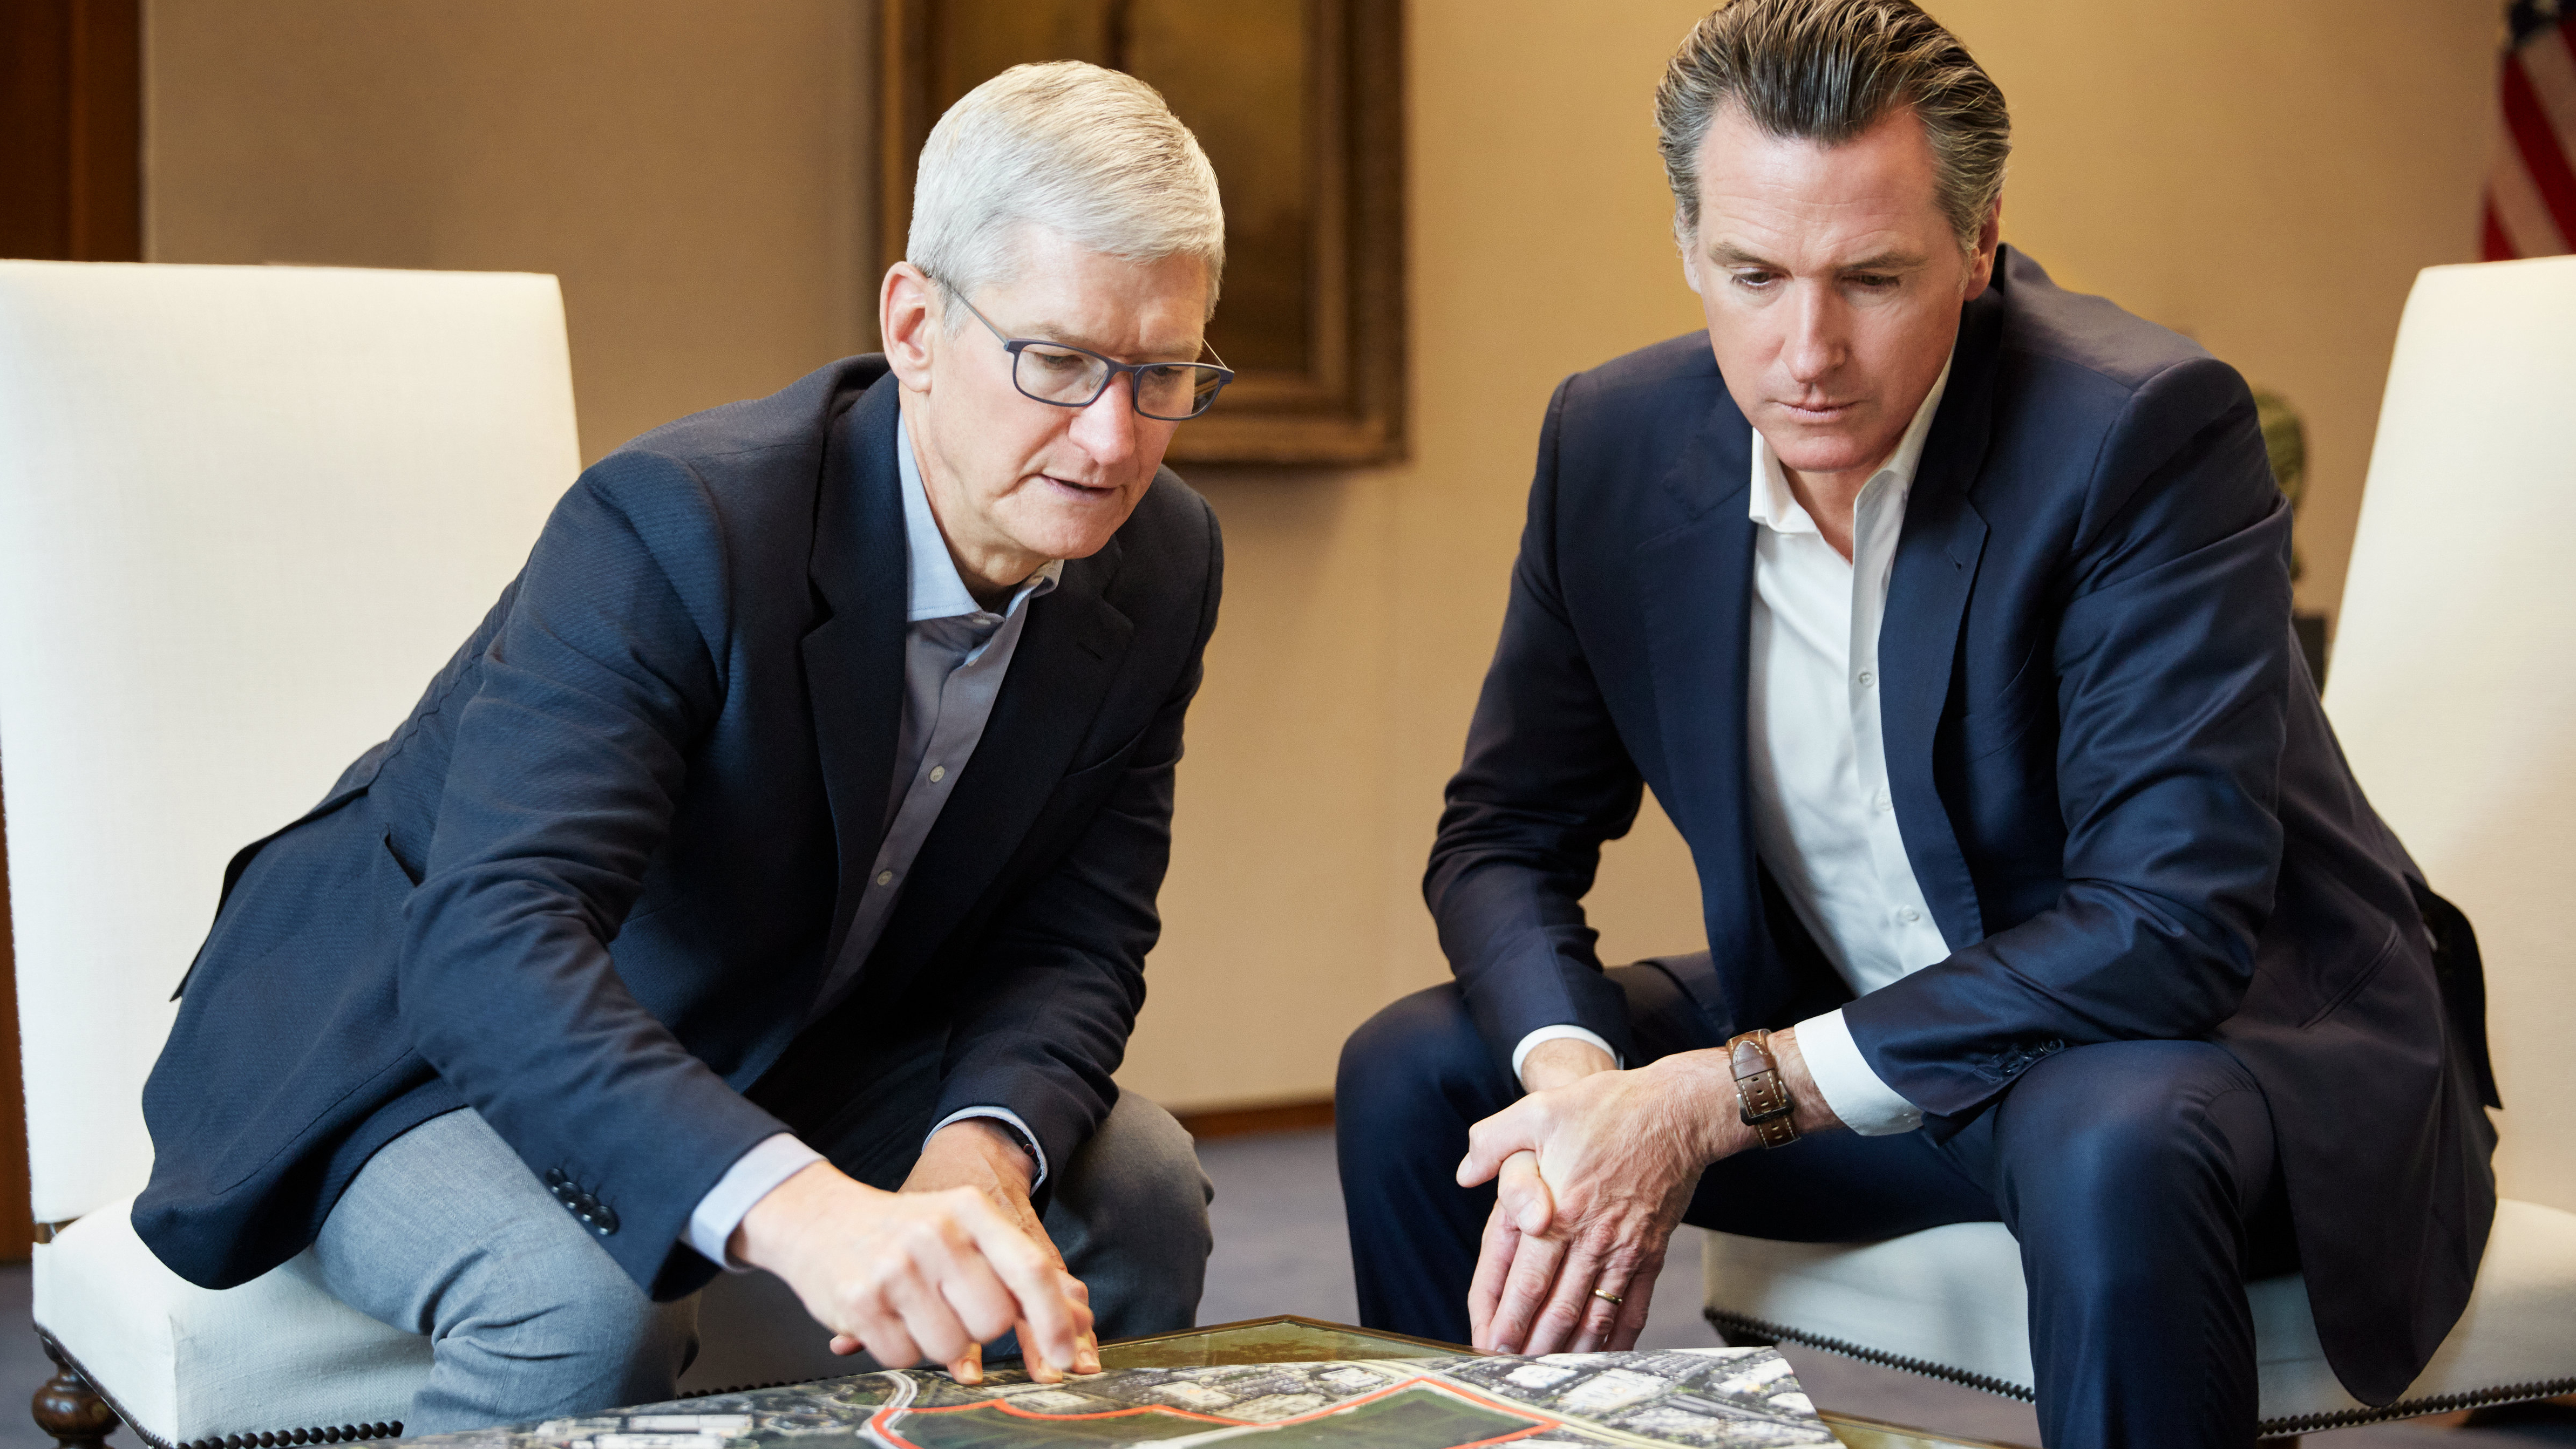 Apple CEO Tim Cook and California Gov. Gavin Newsom unveiled the tech company's plan to help ease the housing crisis, with Apple pledging $2.5 billion for mortgages, development and other initiatives.